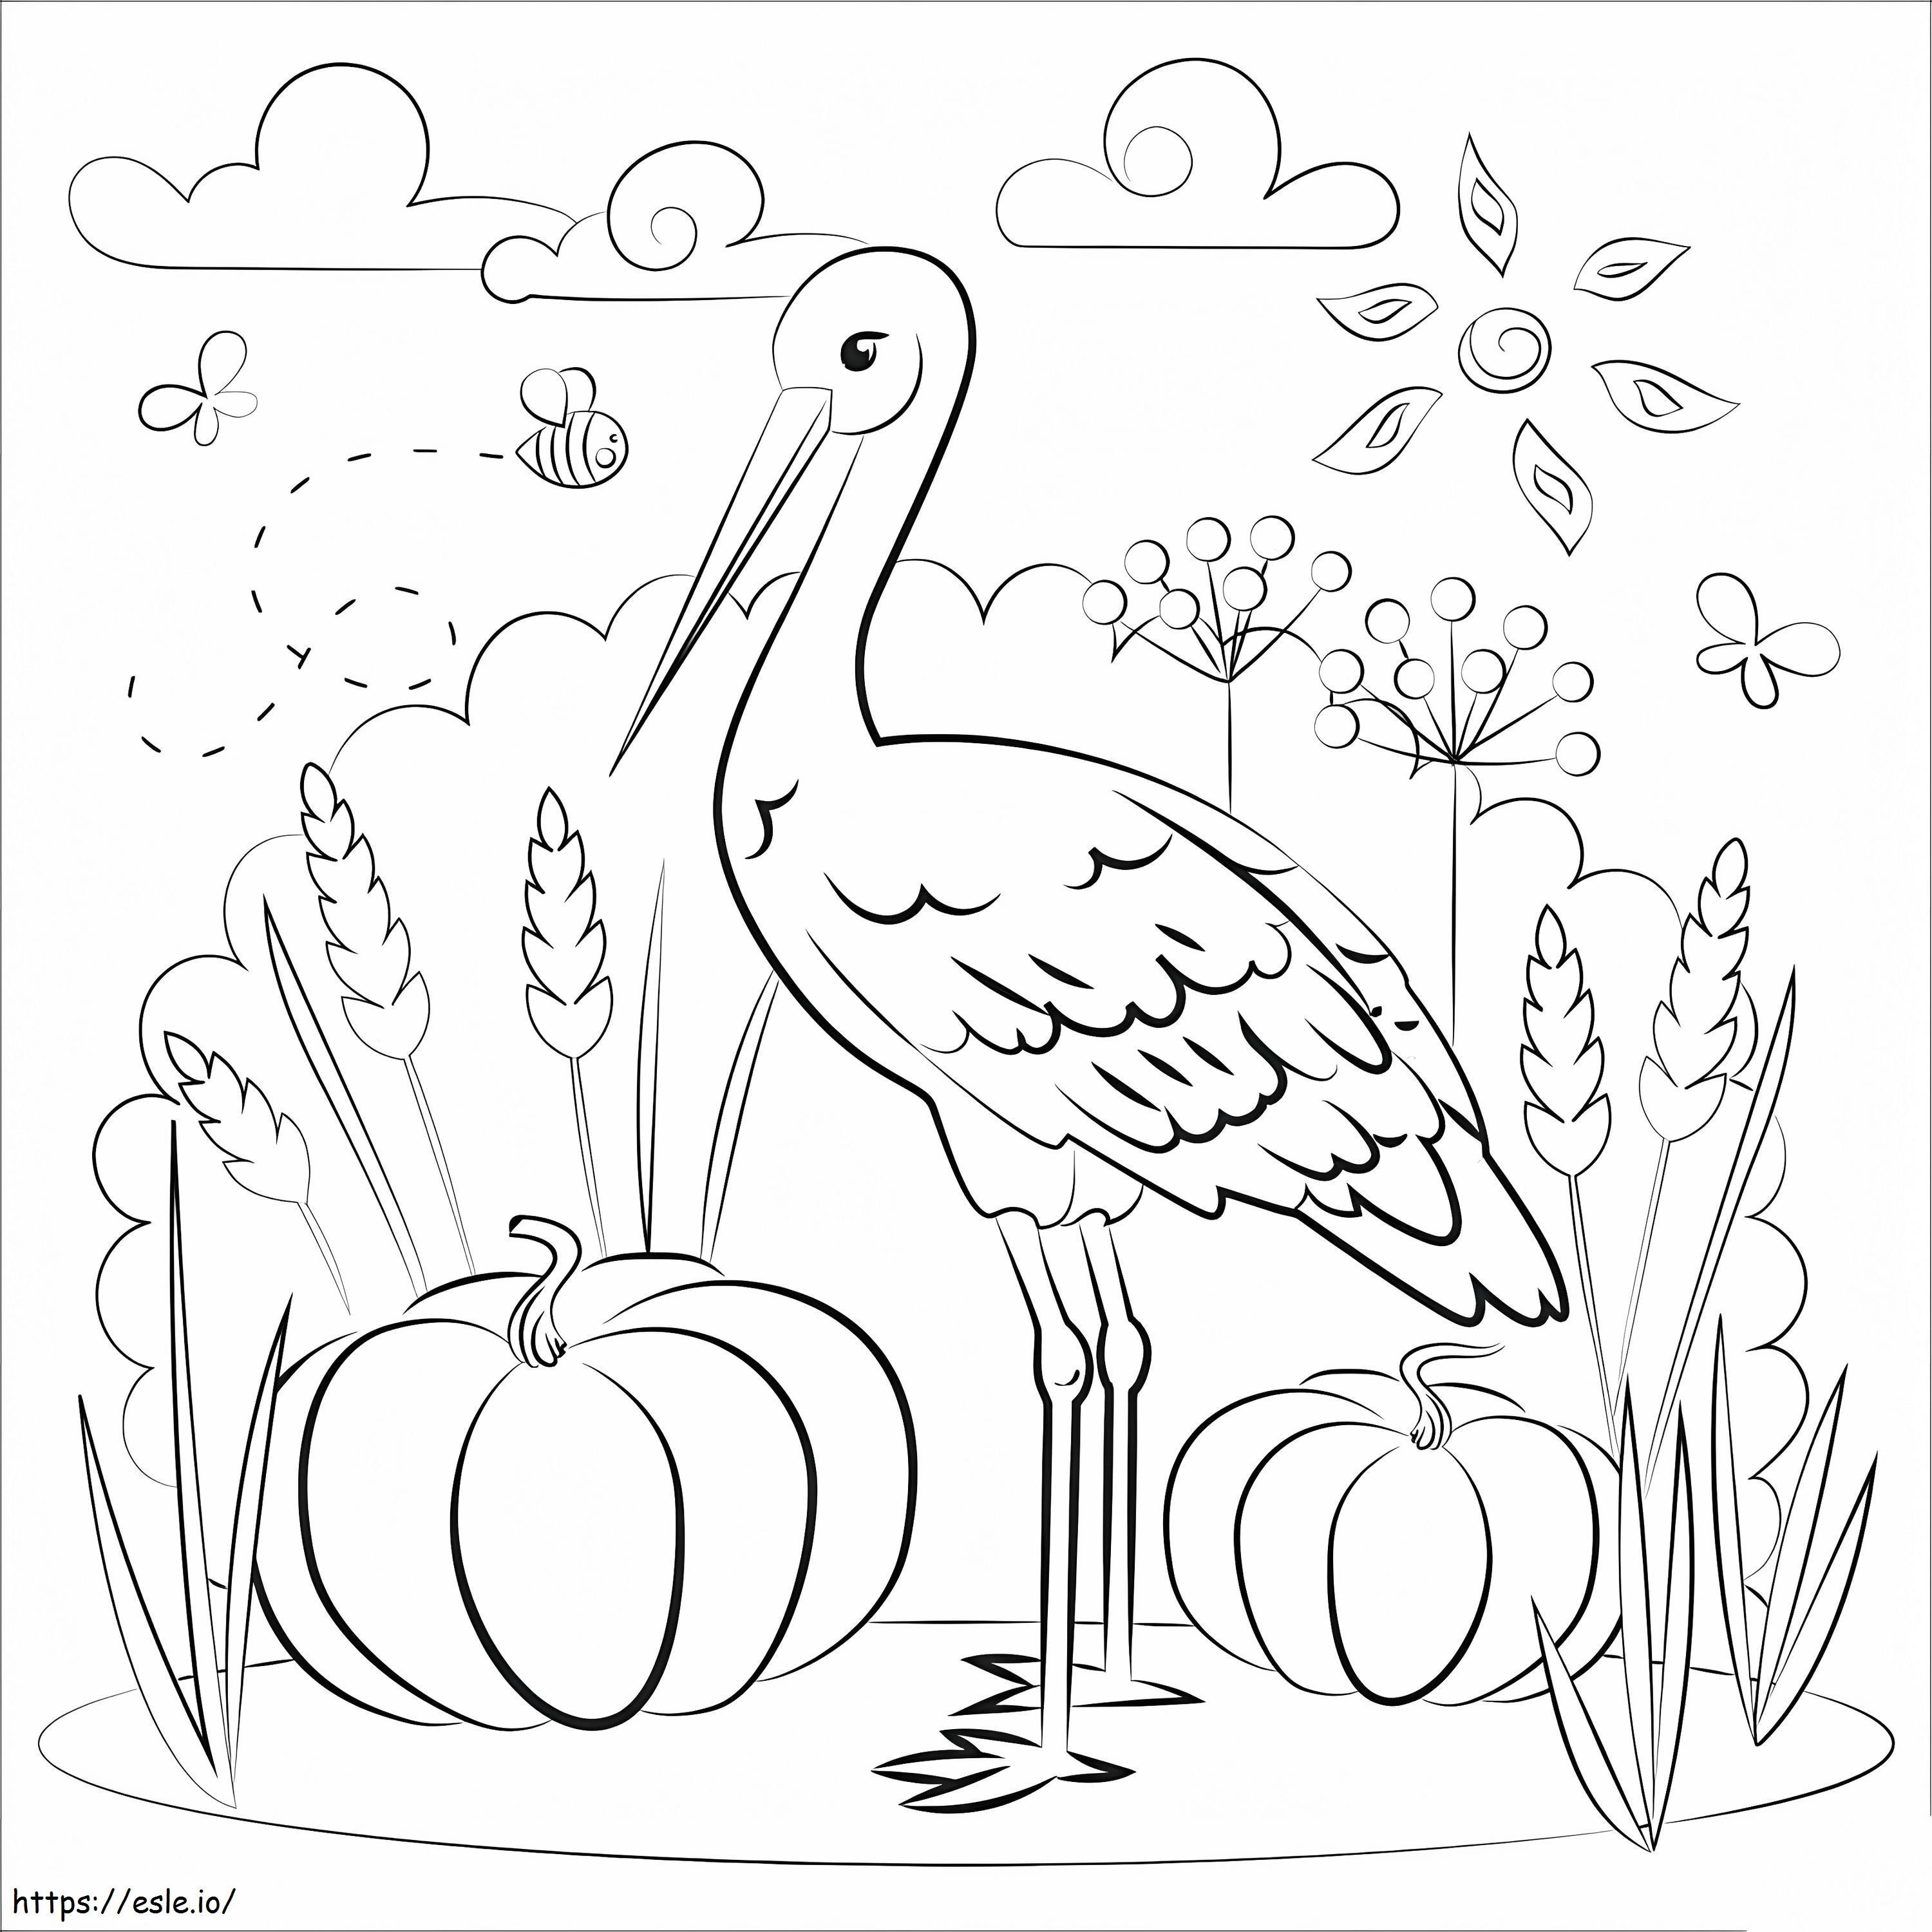 Lovely Stork coloring page